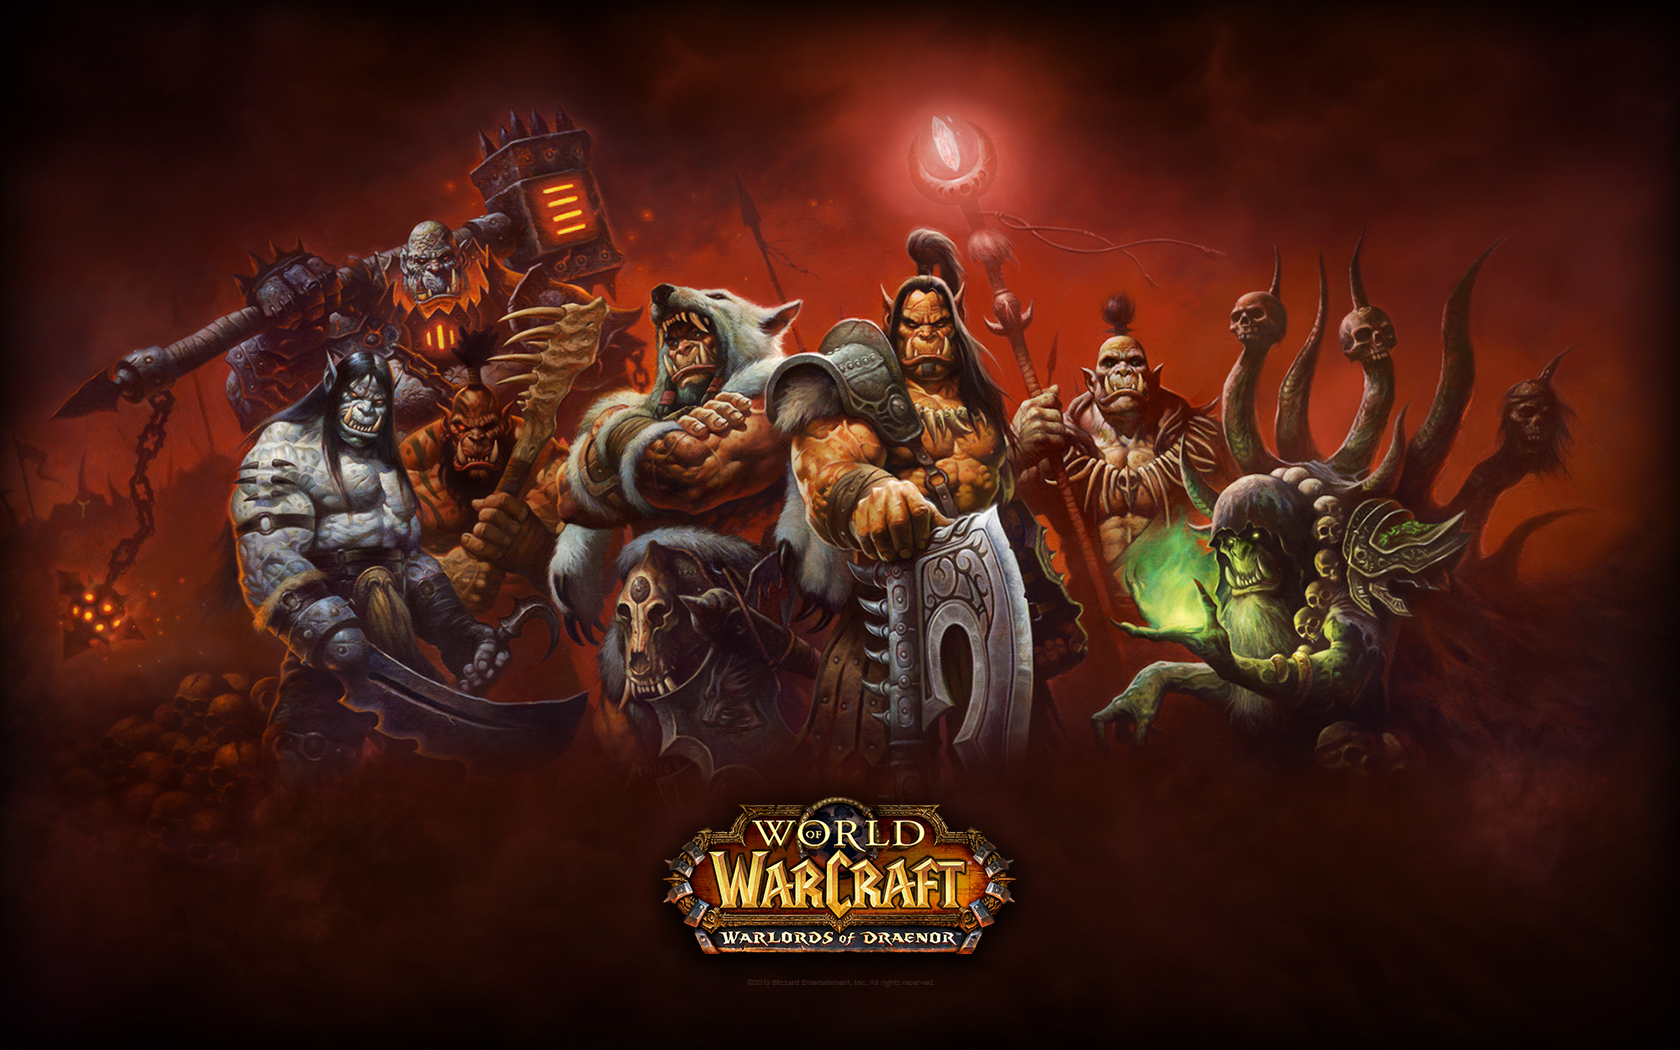 World Of Warcraft: Warlords Of Draenor #3